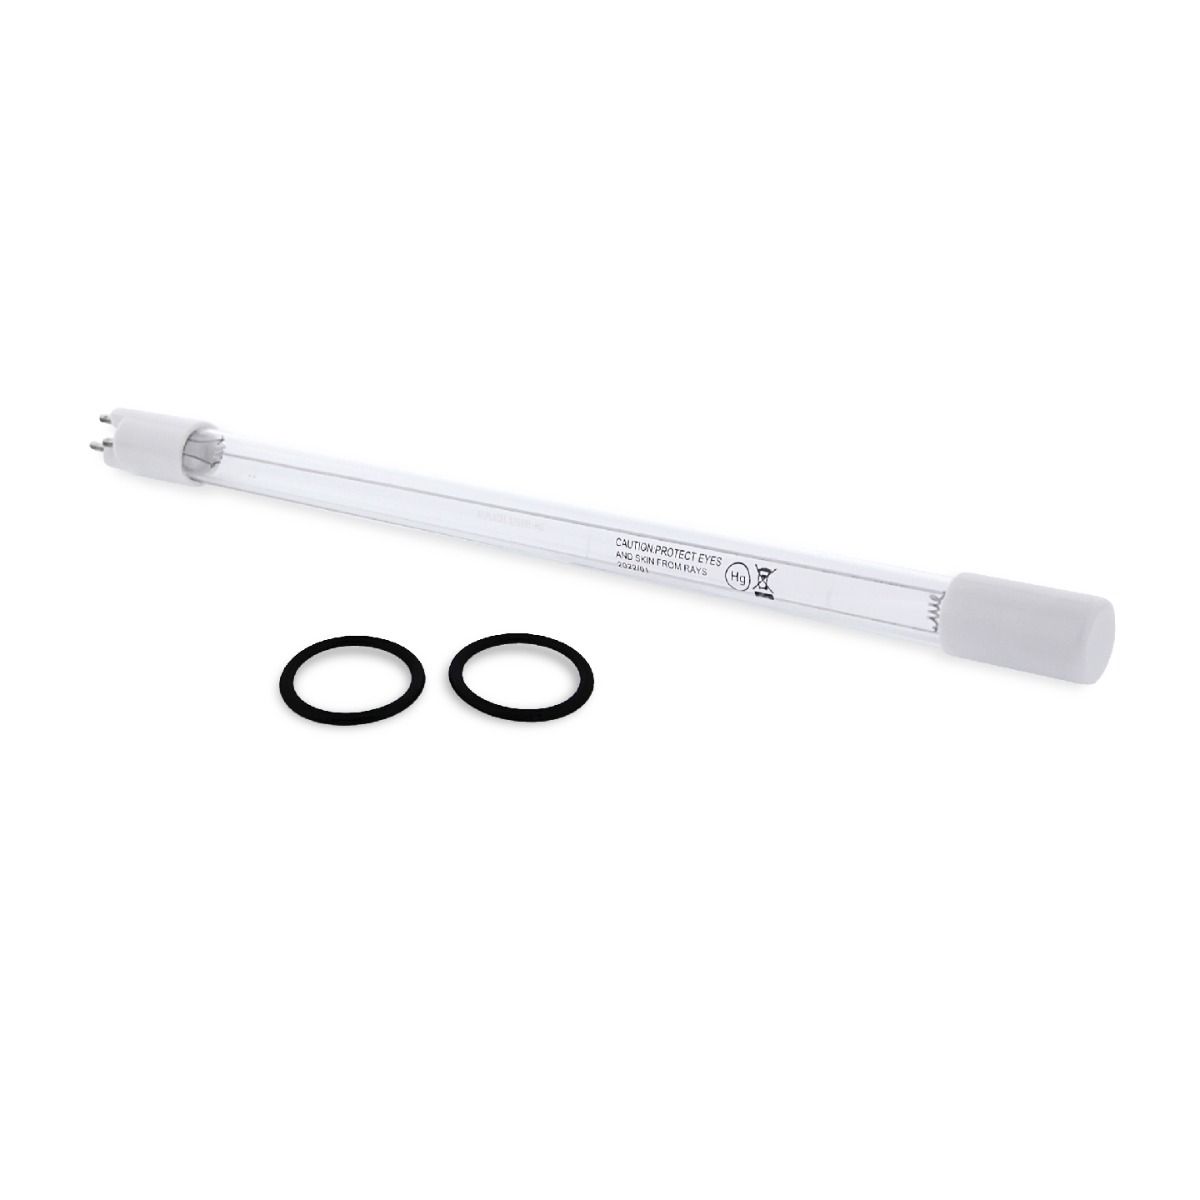 USWF Replacement for S320RL-HO UV Lamp | Fits the VIQUA SP320-HO, SC320, & SPV-6 Series UV Systems